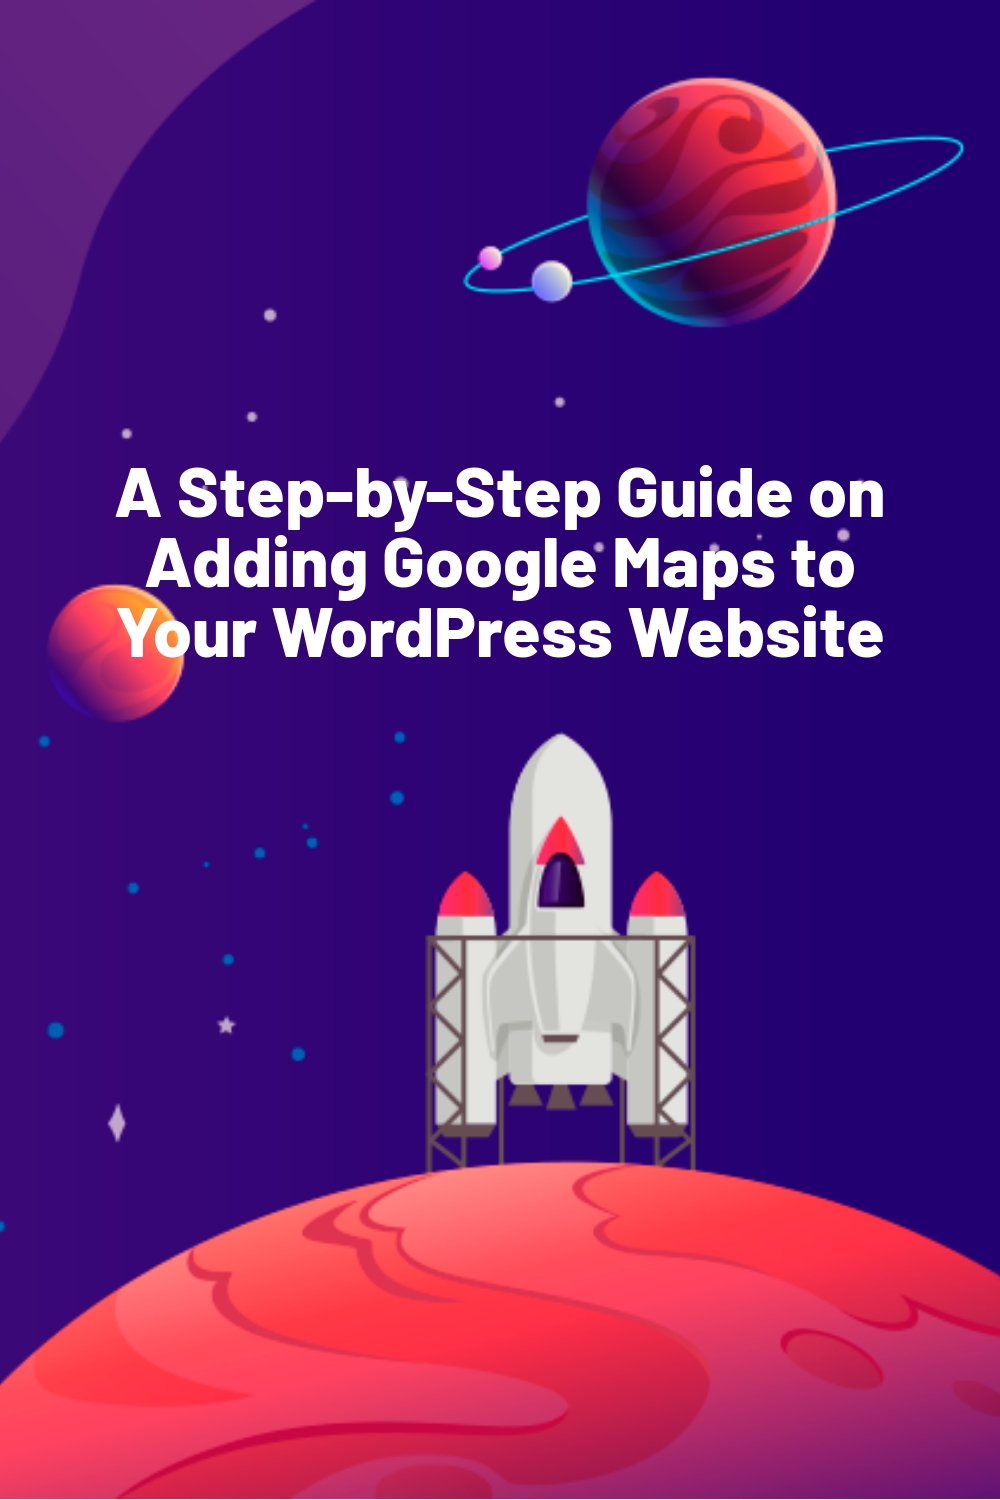 A Step-by-Step Guide on Adding Google Maps to Your WordPress Website